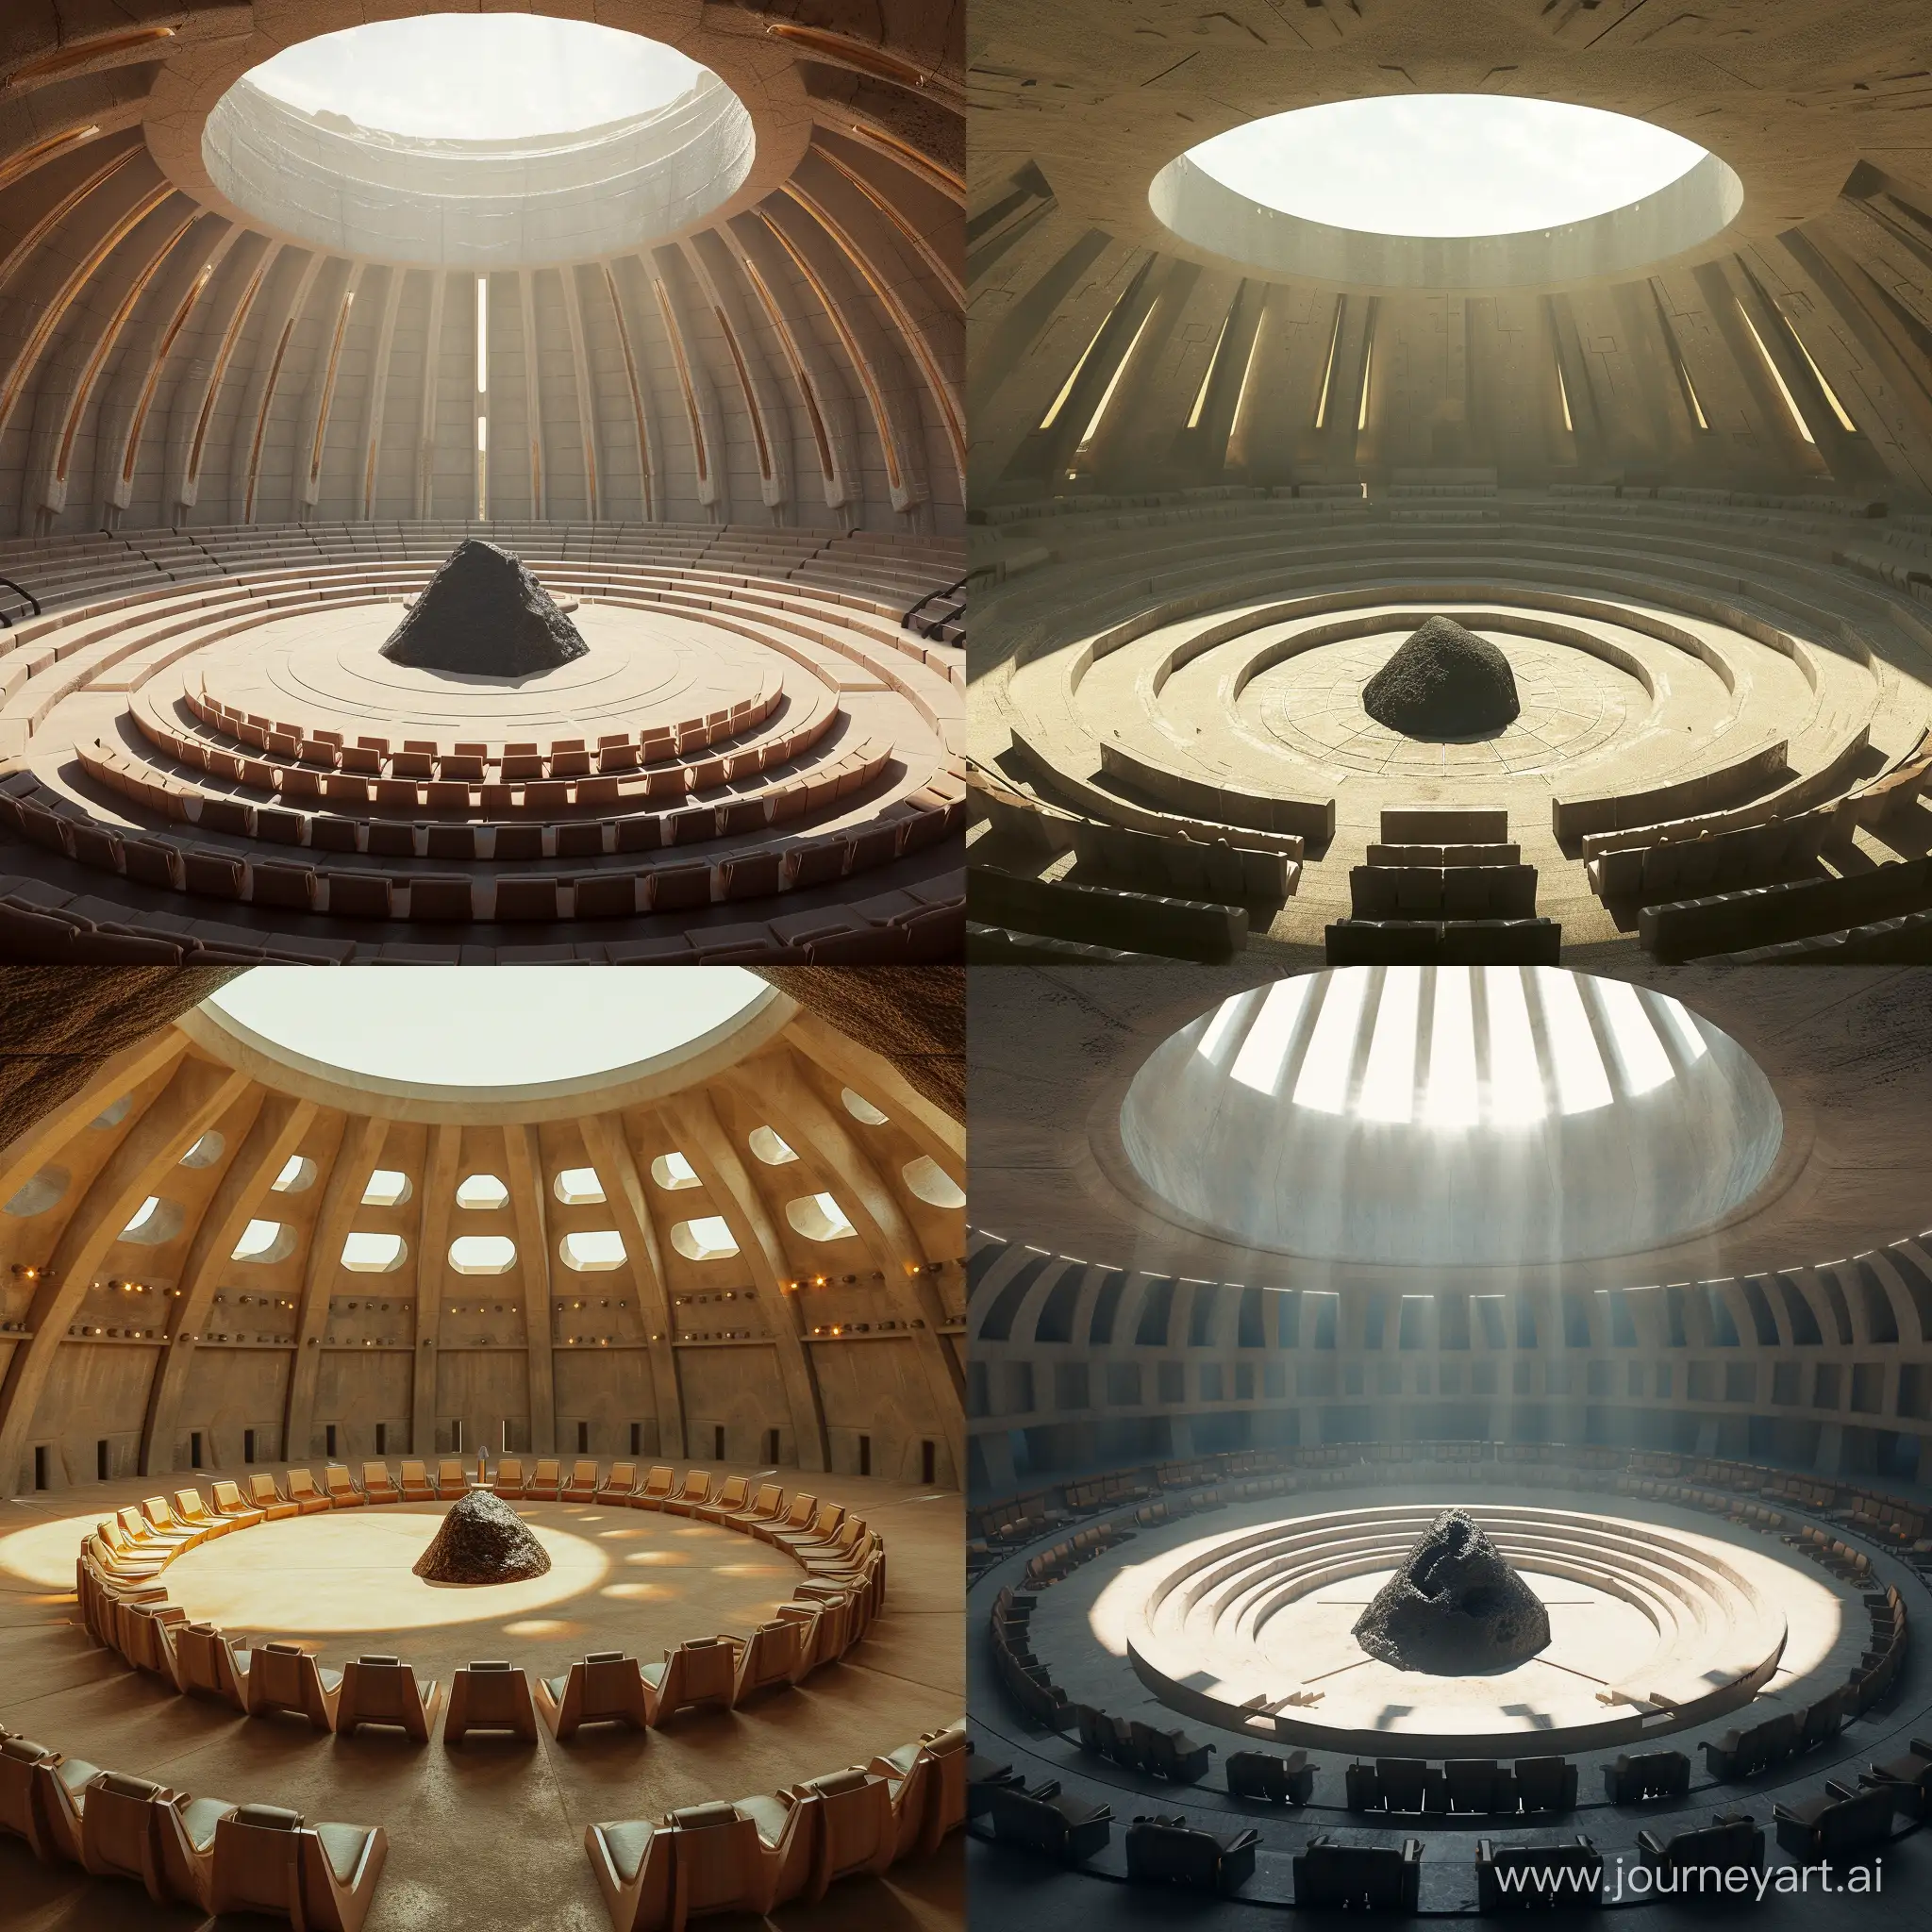 A temple to the moon. The view is from the main entrance. It is a small but tidy circular hall. The seats are placed in a circle around the central altar. The altar is a black lump of rock. It is day and sunlight is coming in from a ring of windows in the dome.